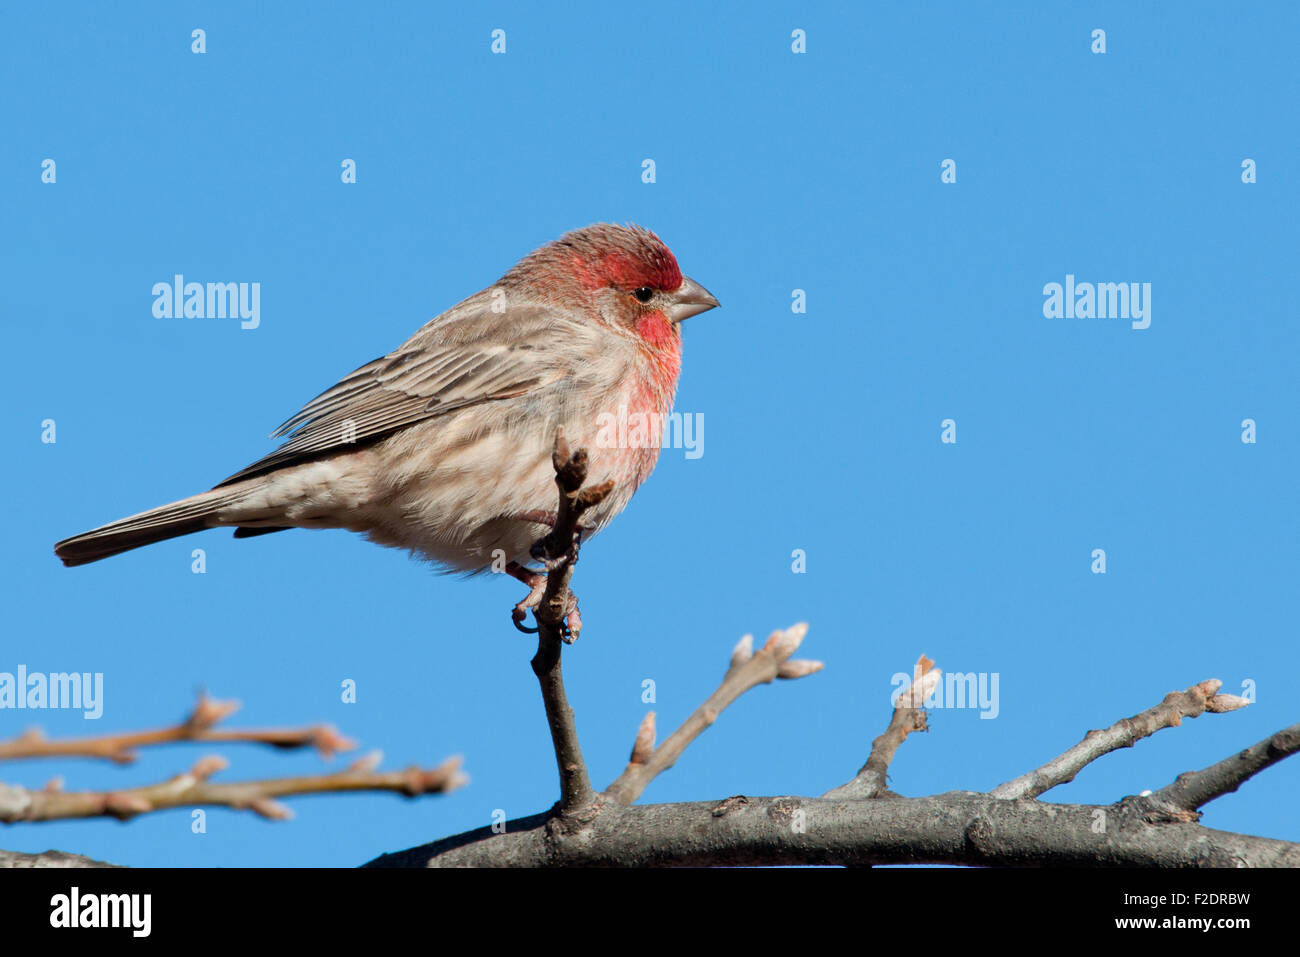 Male House Finch perched in a tree against clear blue winter sky Stock Photo